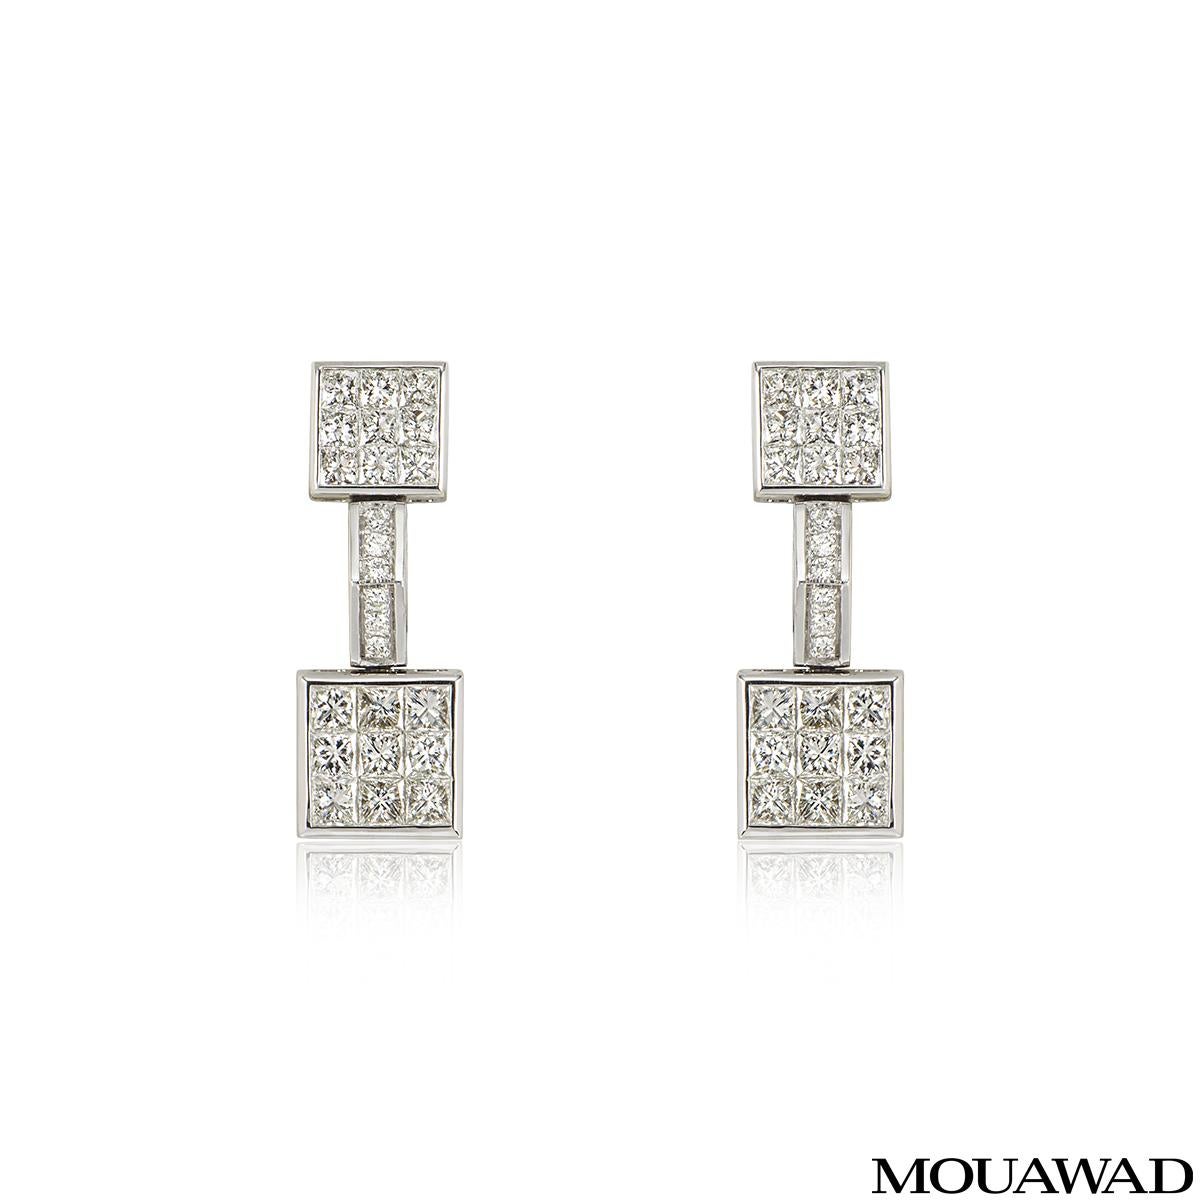 A sparkly pair of 18k white gold diamond earrings by Mouawad. Each earring comprise of 2 square motifs with a bar connecting the two. The square motifs have 9 princess cut diamonds in each and the bar features 6 round brilliant cut diamonds in a